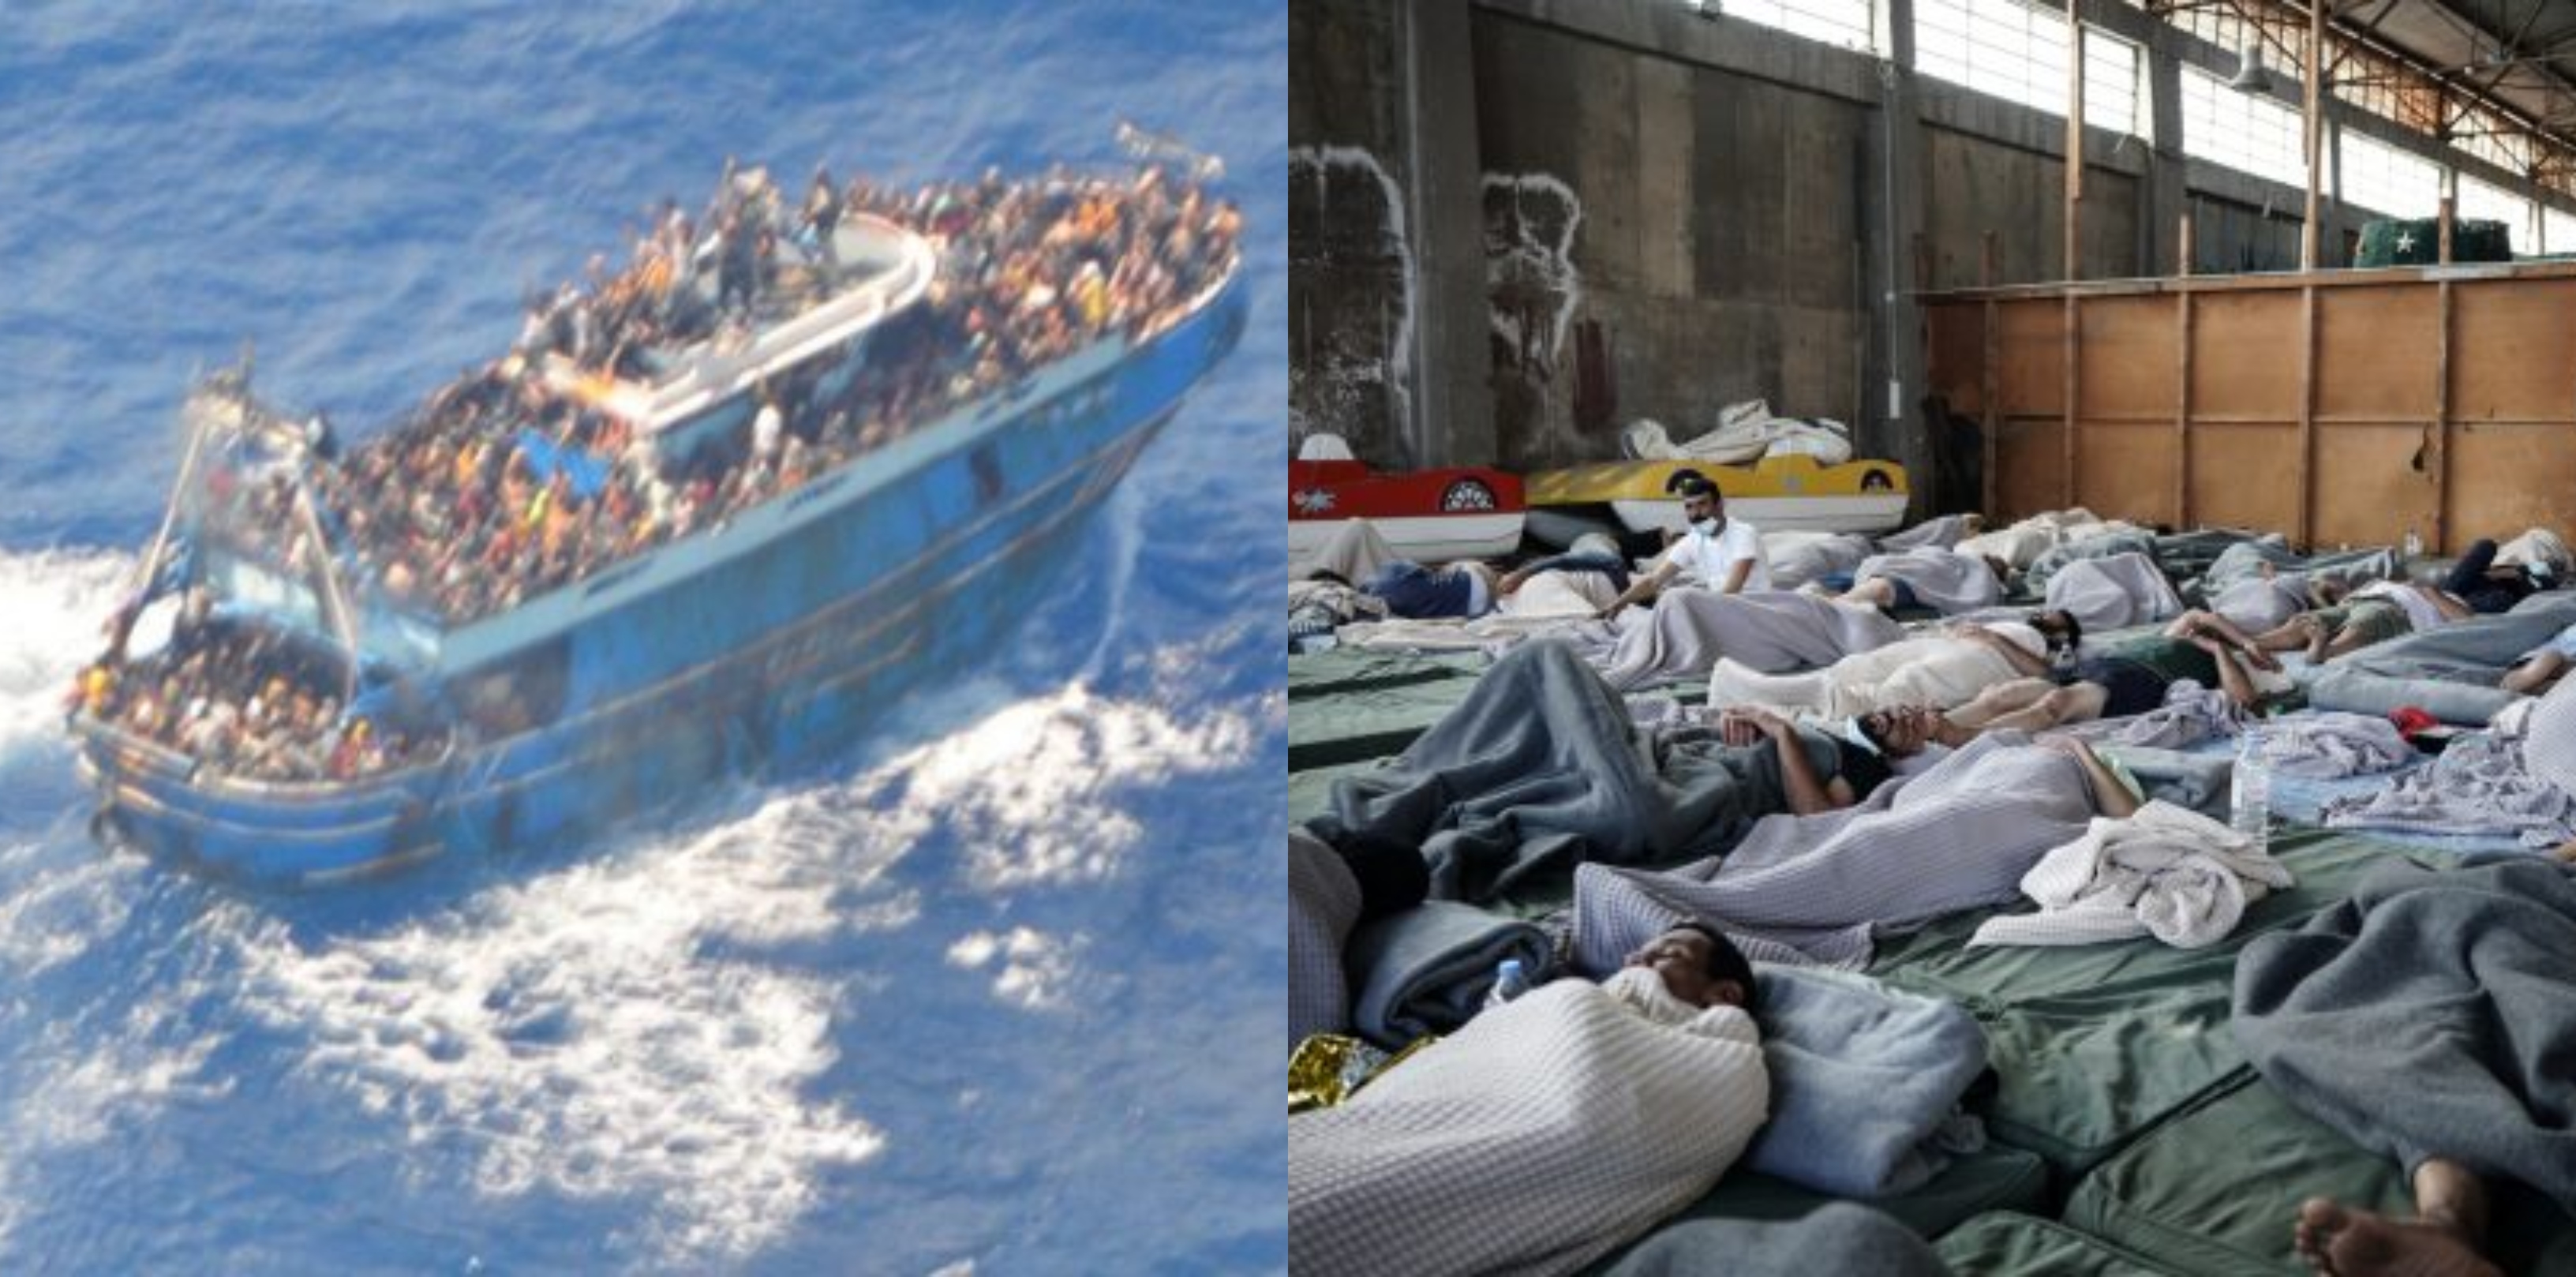 Authorities fear much higher death toll from overturned migrant boat SW of Greece; operators refused offers of assistance on Tues.